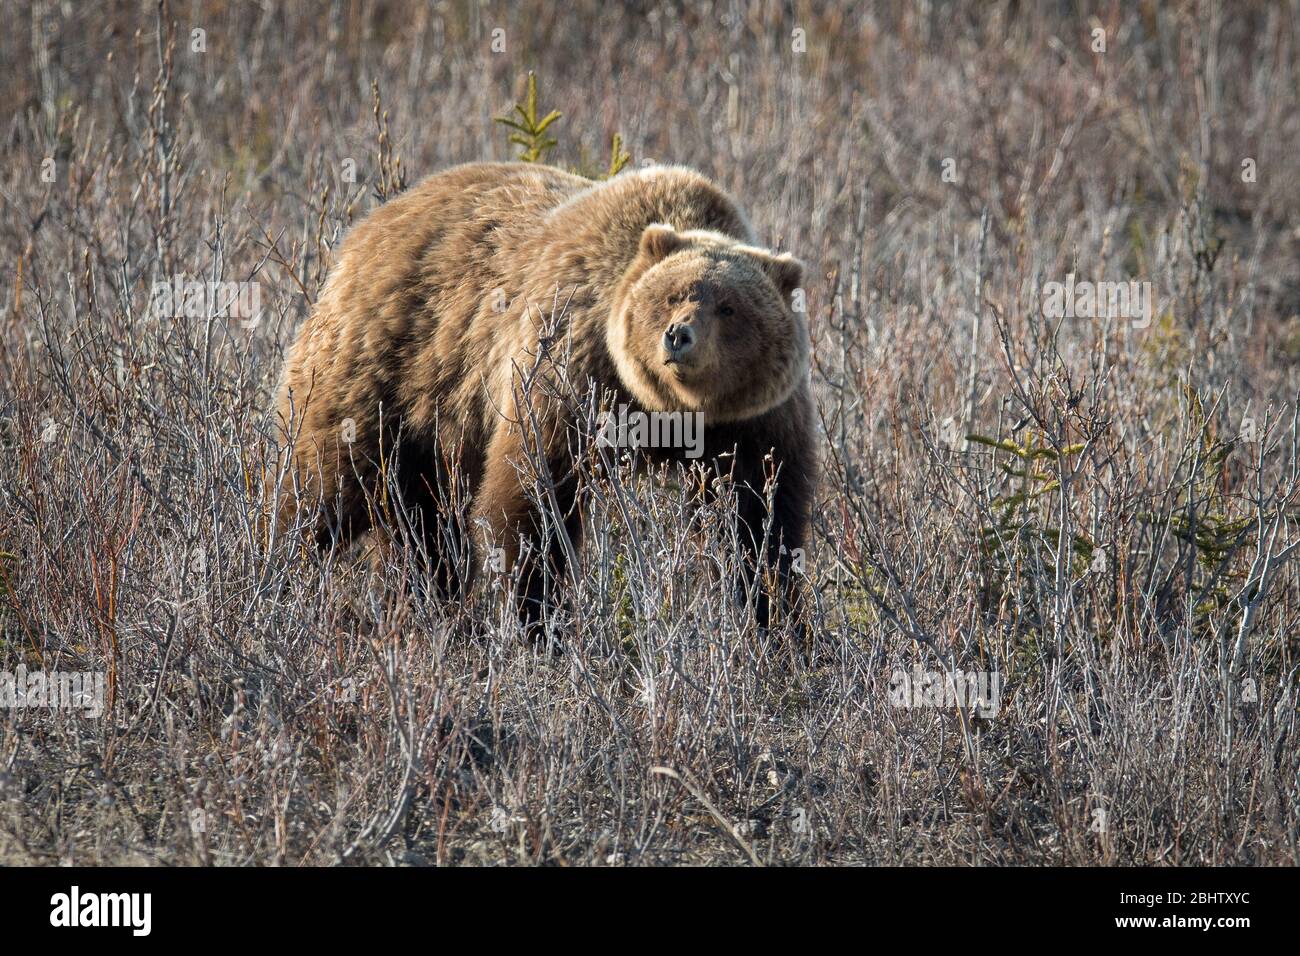 A grizzly bear hunts for roots to dig up for his meal in the spring in Denali Natl. Park, AK. Stock Photo